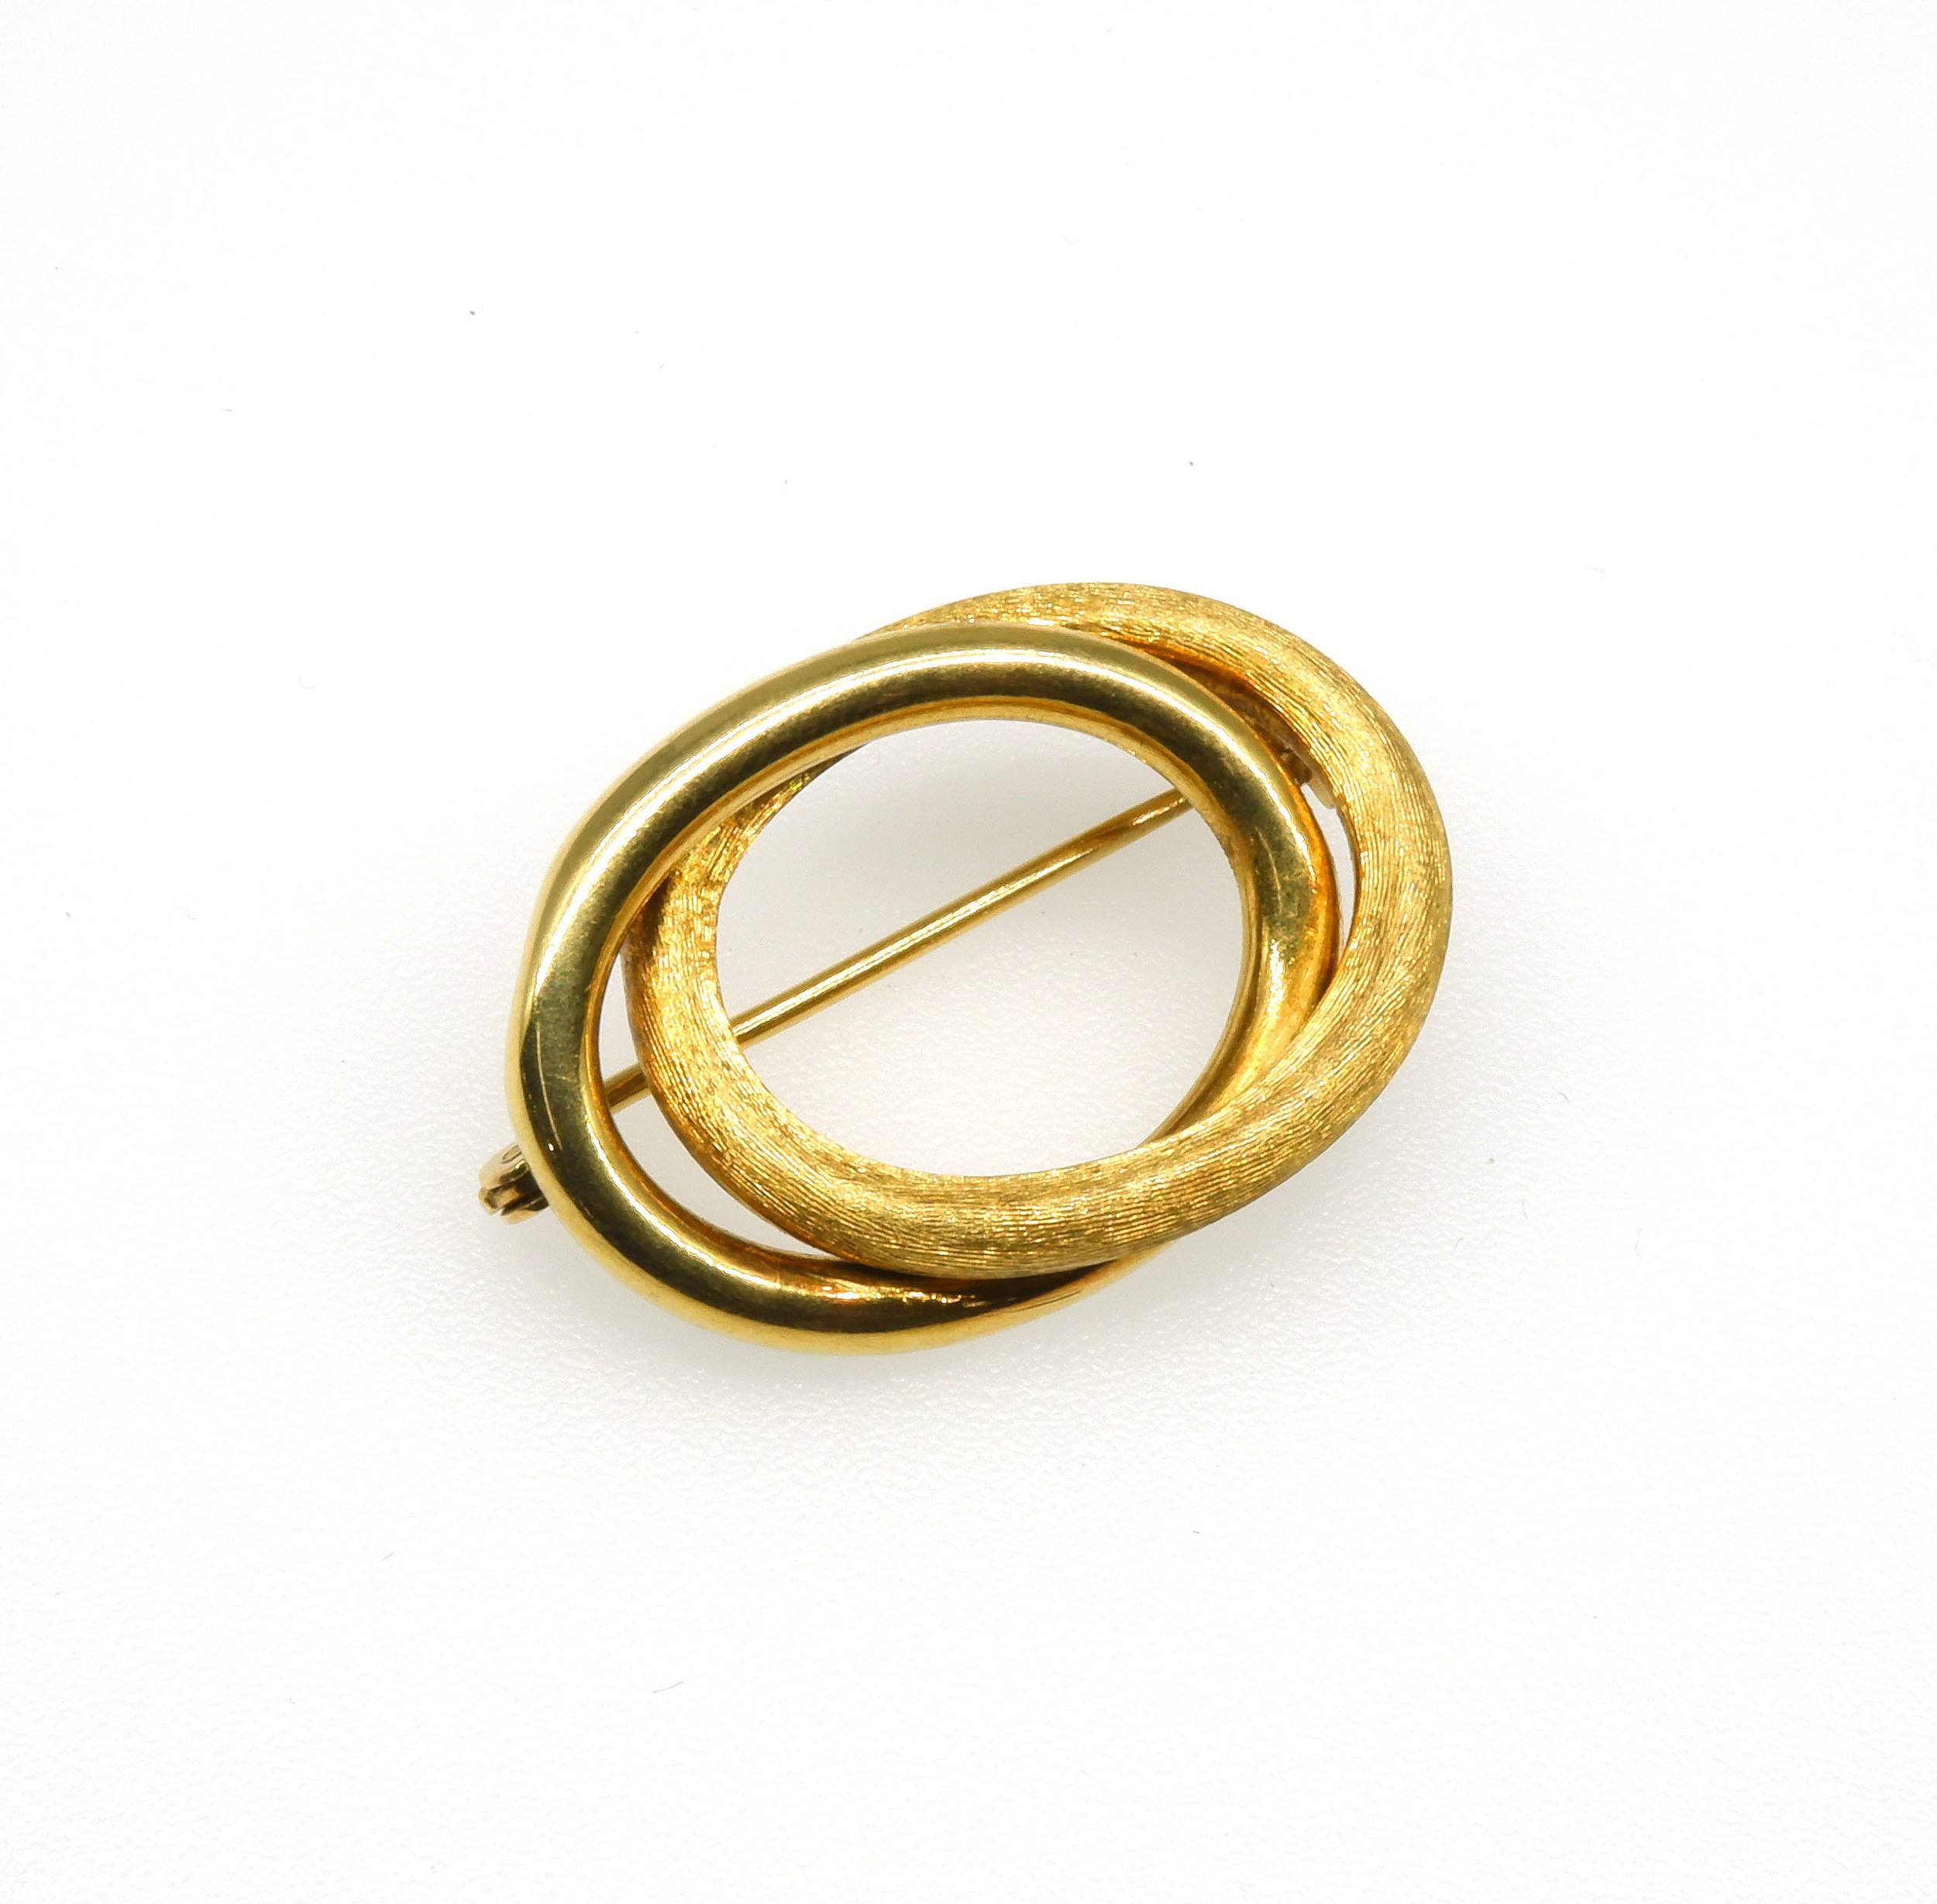 '14ct Yellow Gold Two Oval Framed Intertwined Hollow Brooch'